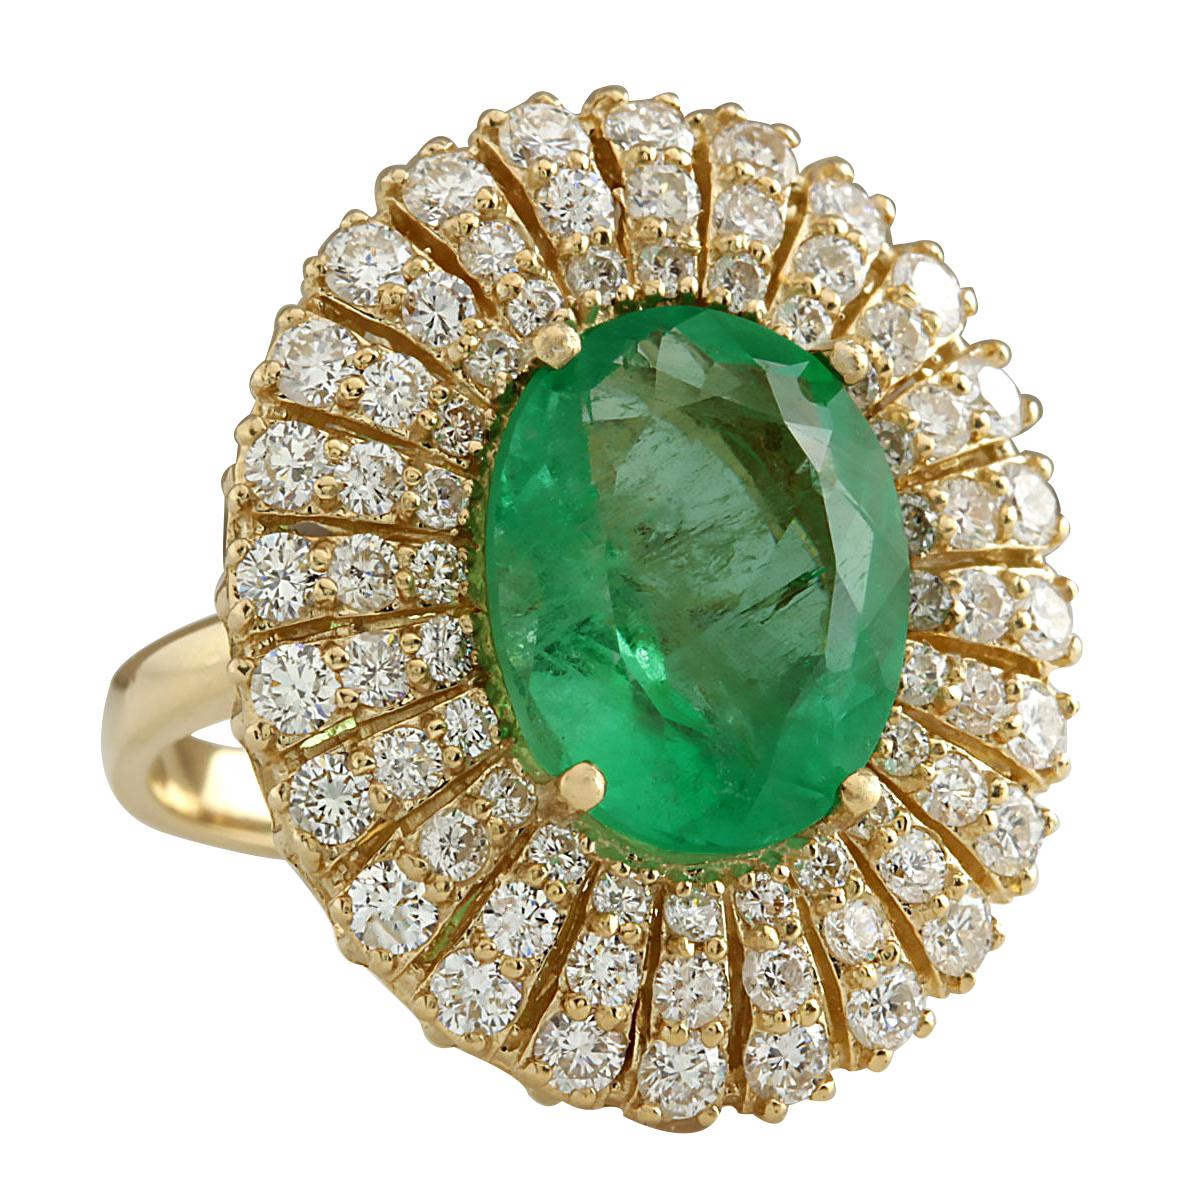 Presenting our captivating 6.94 Carat Emerald 14 Karat Yellow Gold Diamond Ring. Crafted from stamped 14K Yellow Gold, this ring boasts a total weight of 6.5 grams, ensuring both quality and durability. The centerpiece is a stunning emerald gemstone